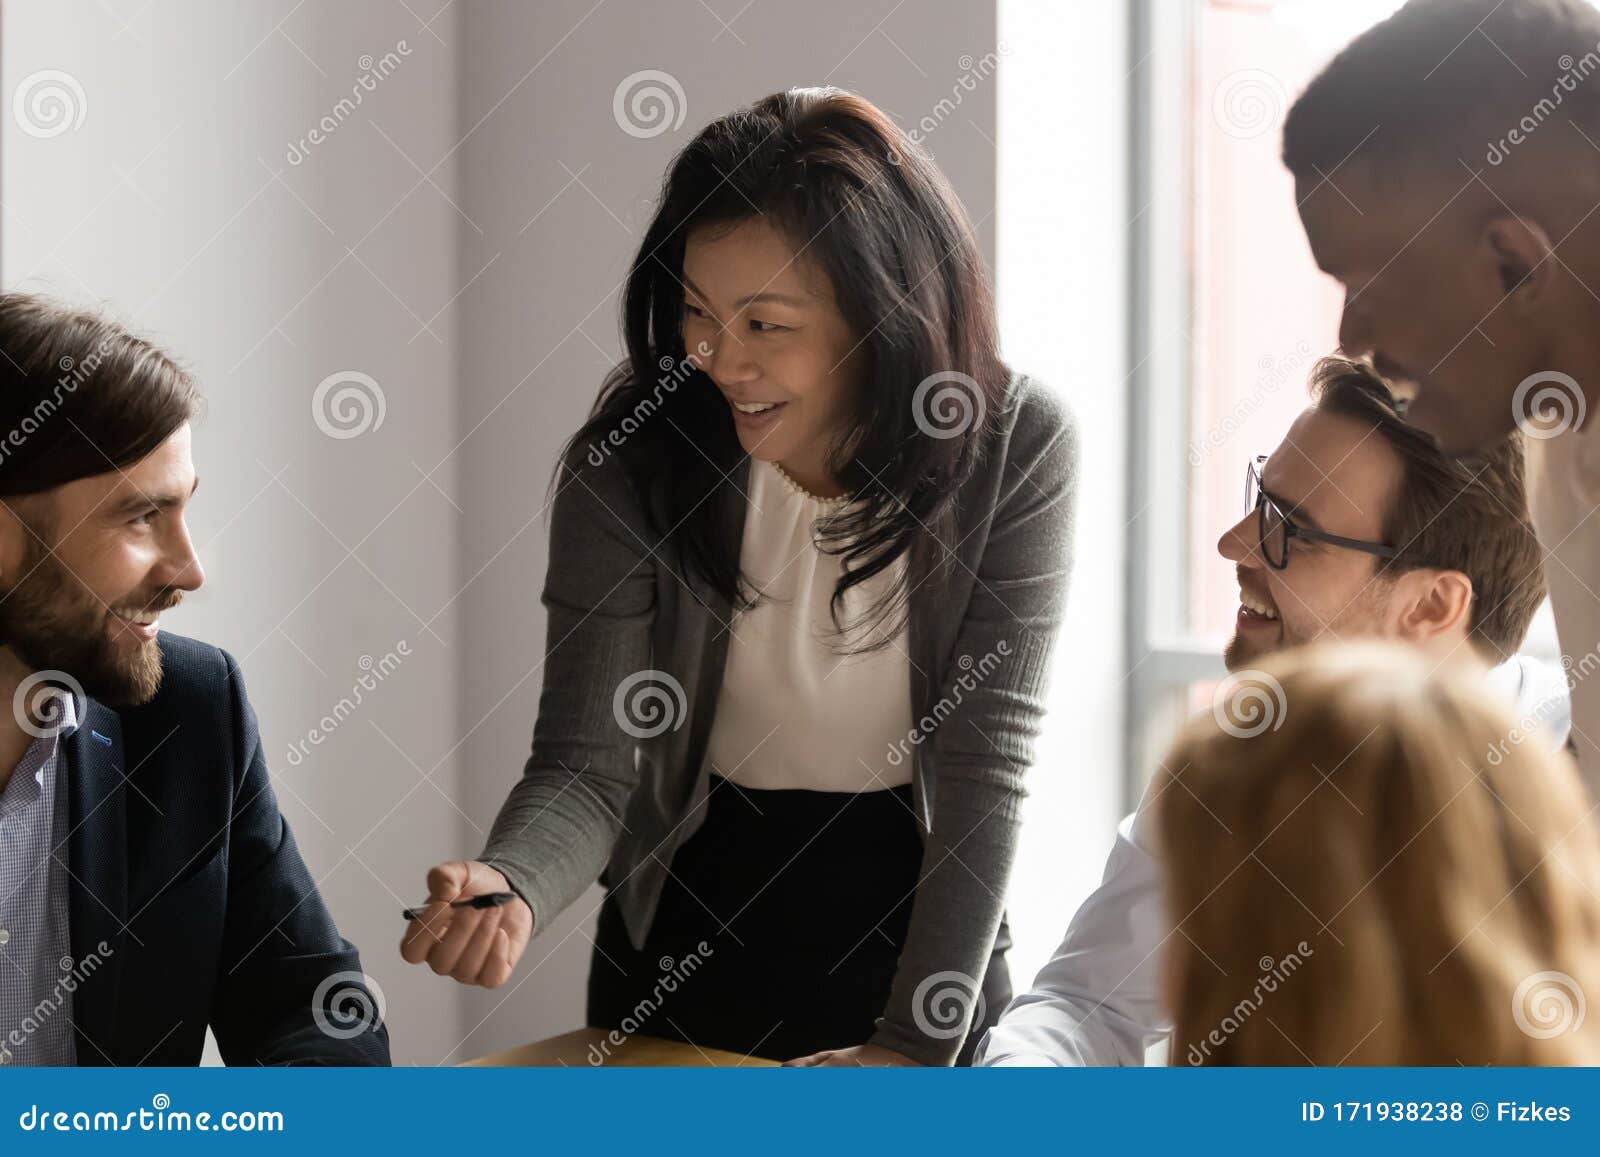 middle aged asian businesswoman talking to diverse colleagues at meeting